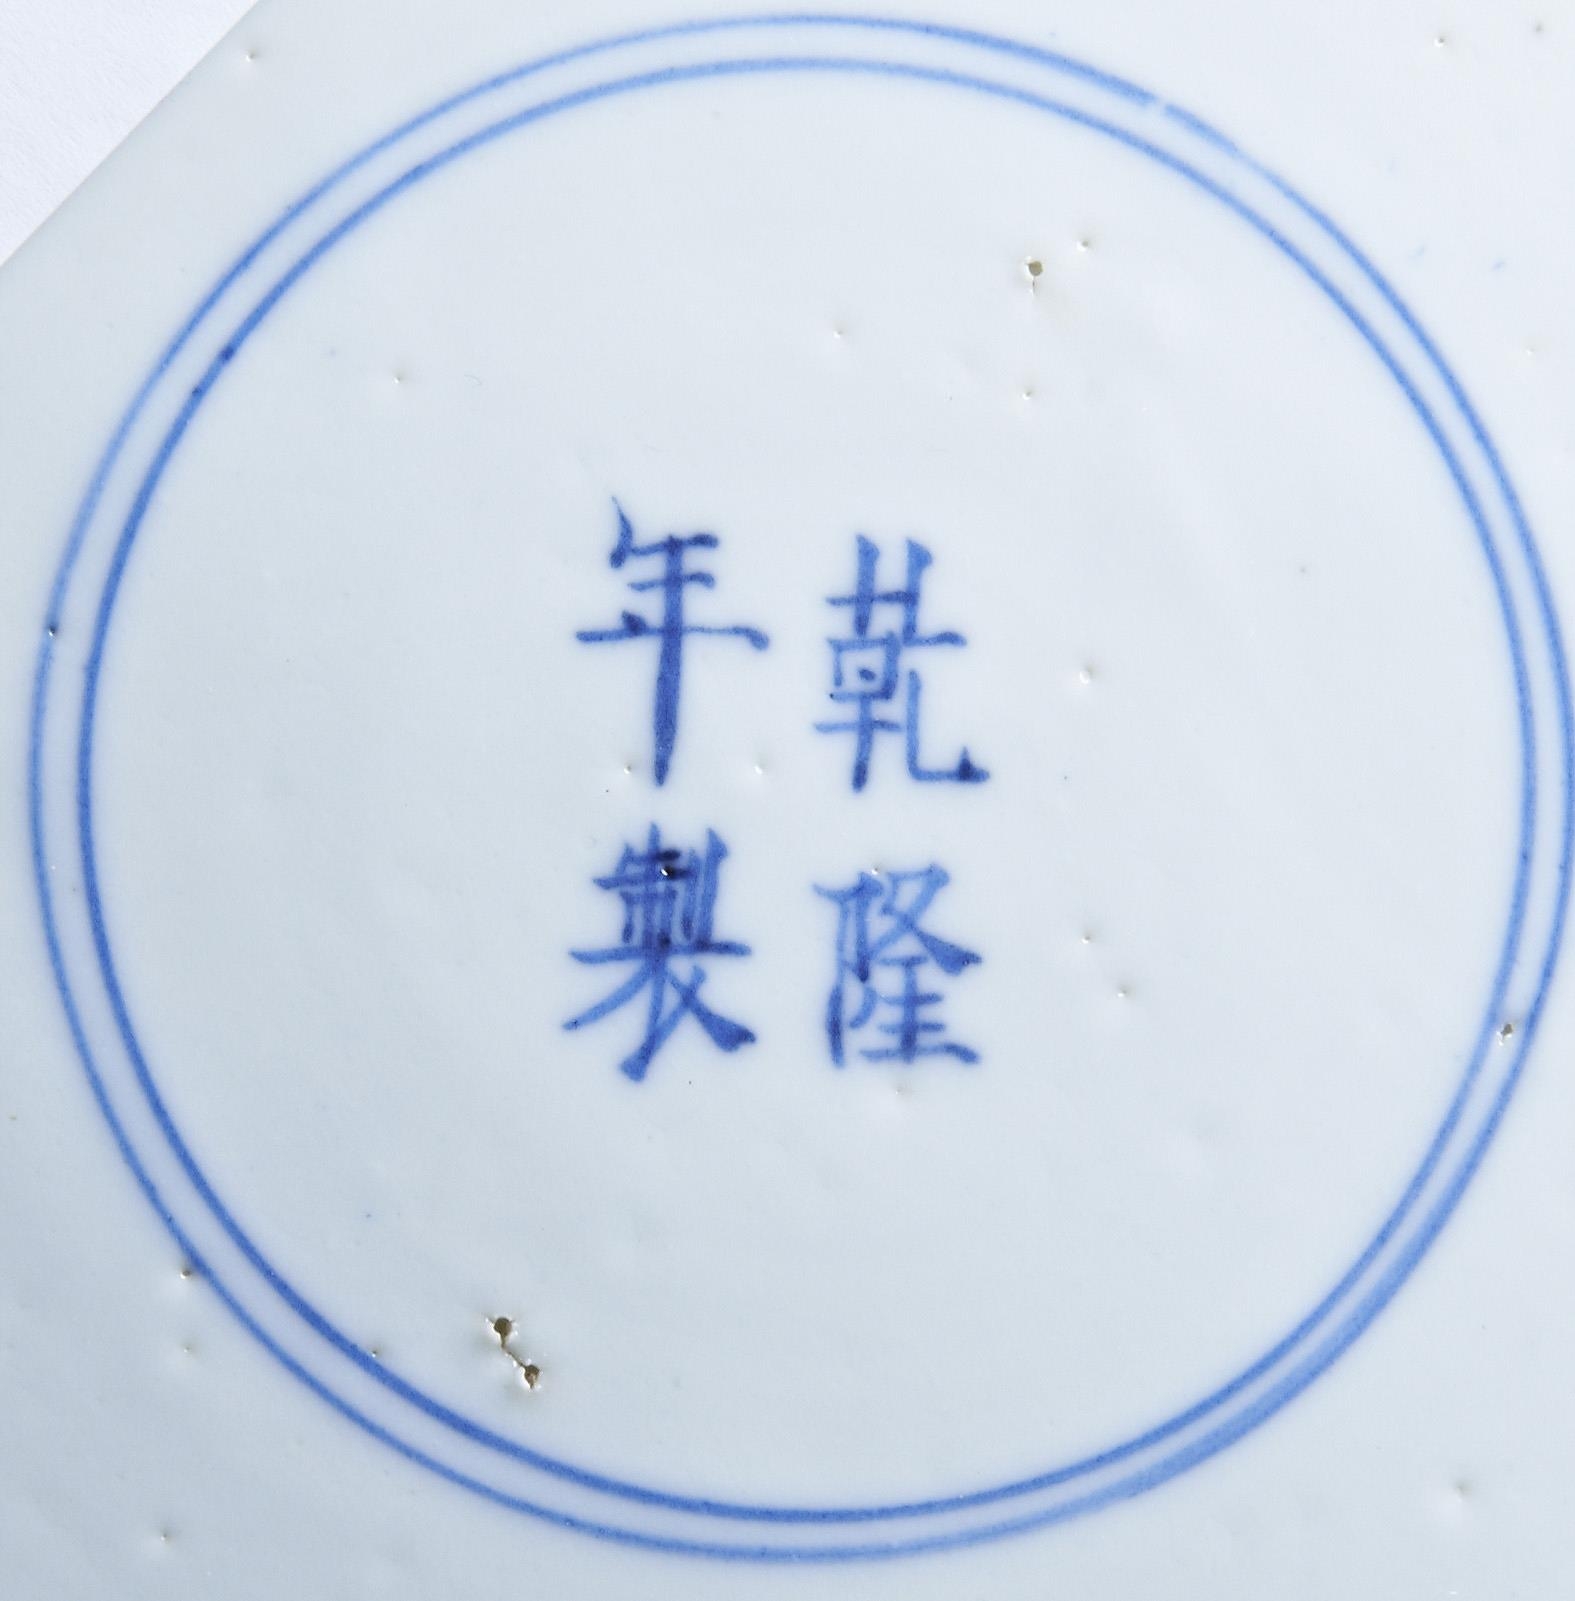 A BLUE AND WHITE PORCELAIN DISH  QING DYNASTY, QIANLONG MARK AND PERIOD  interior painted with - Image 2 of 2